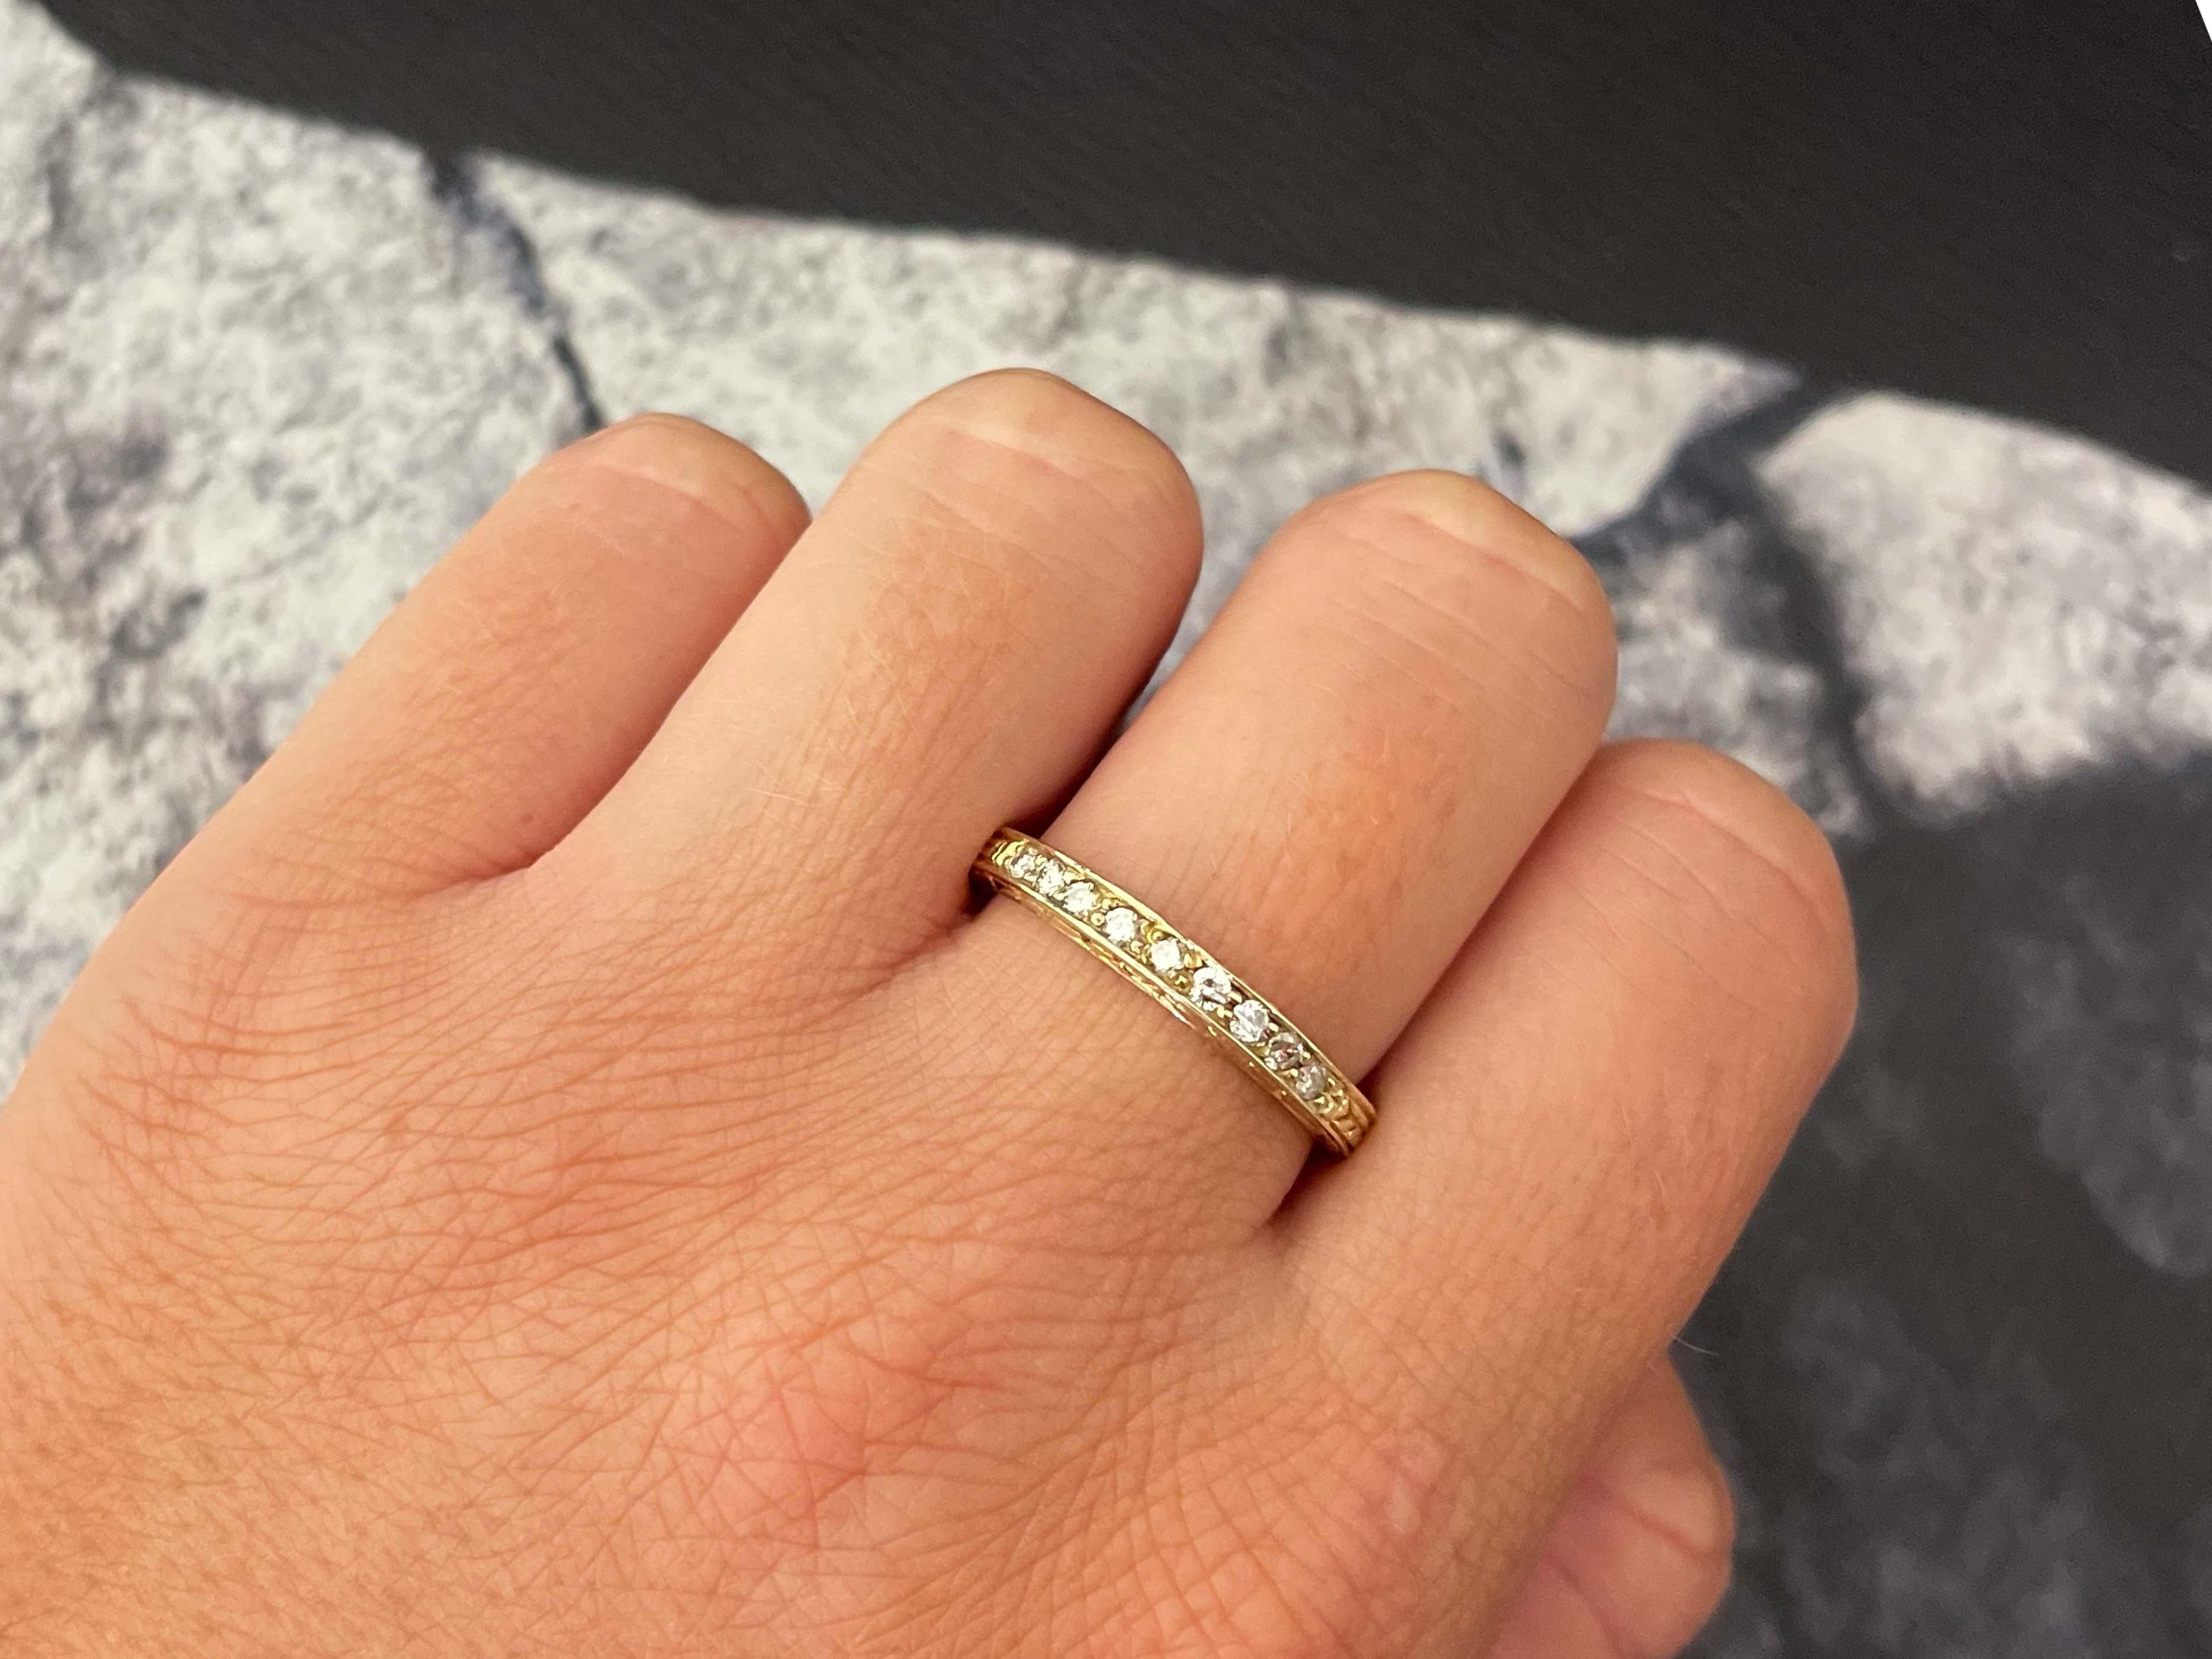 Item Specifications:

Metal: 14K Yellow Gold

Style: Statement Ring

Ring Size: 9.75 (resizing available for a fee)

Total Weight: 3.9 Grams

Diamond Carat Weight: 0.20 carats

Diamond Count: 14

Diamond Color: G-H

Diamond Clarity: